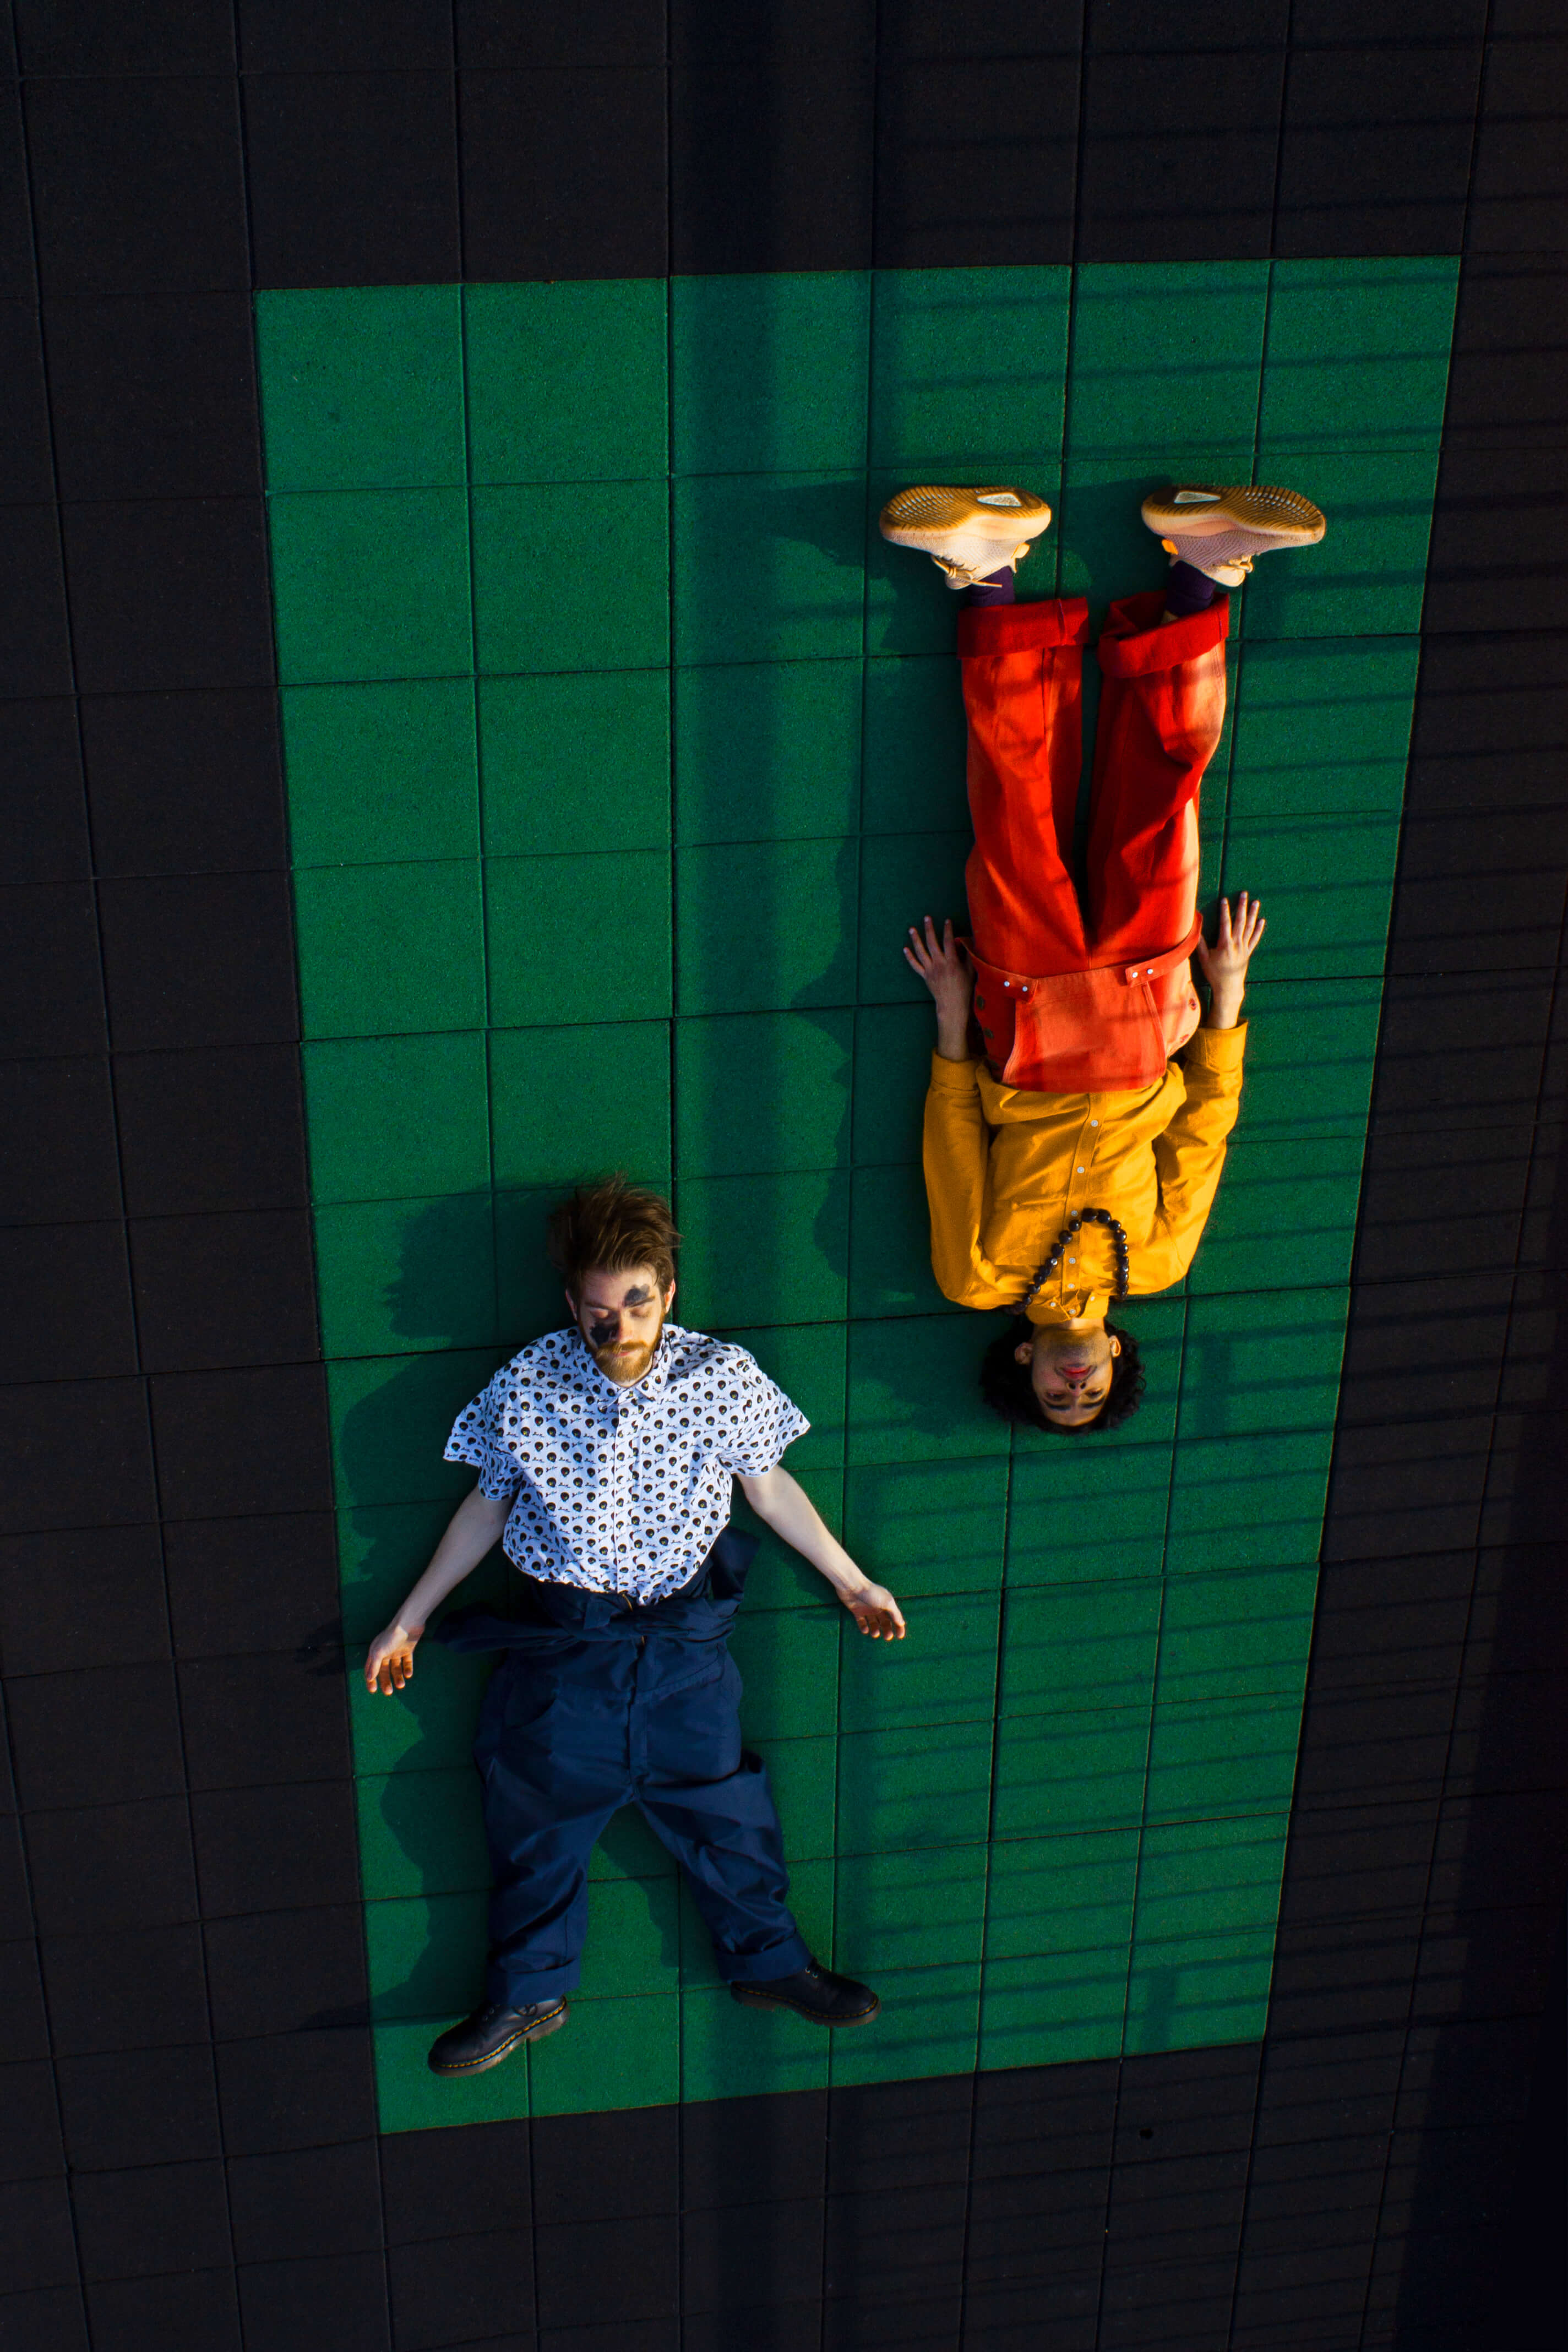 photo from above of two people laying on a green floor